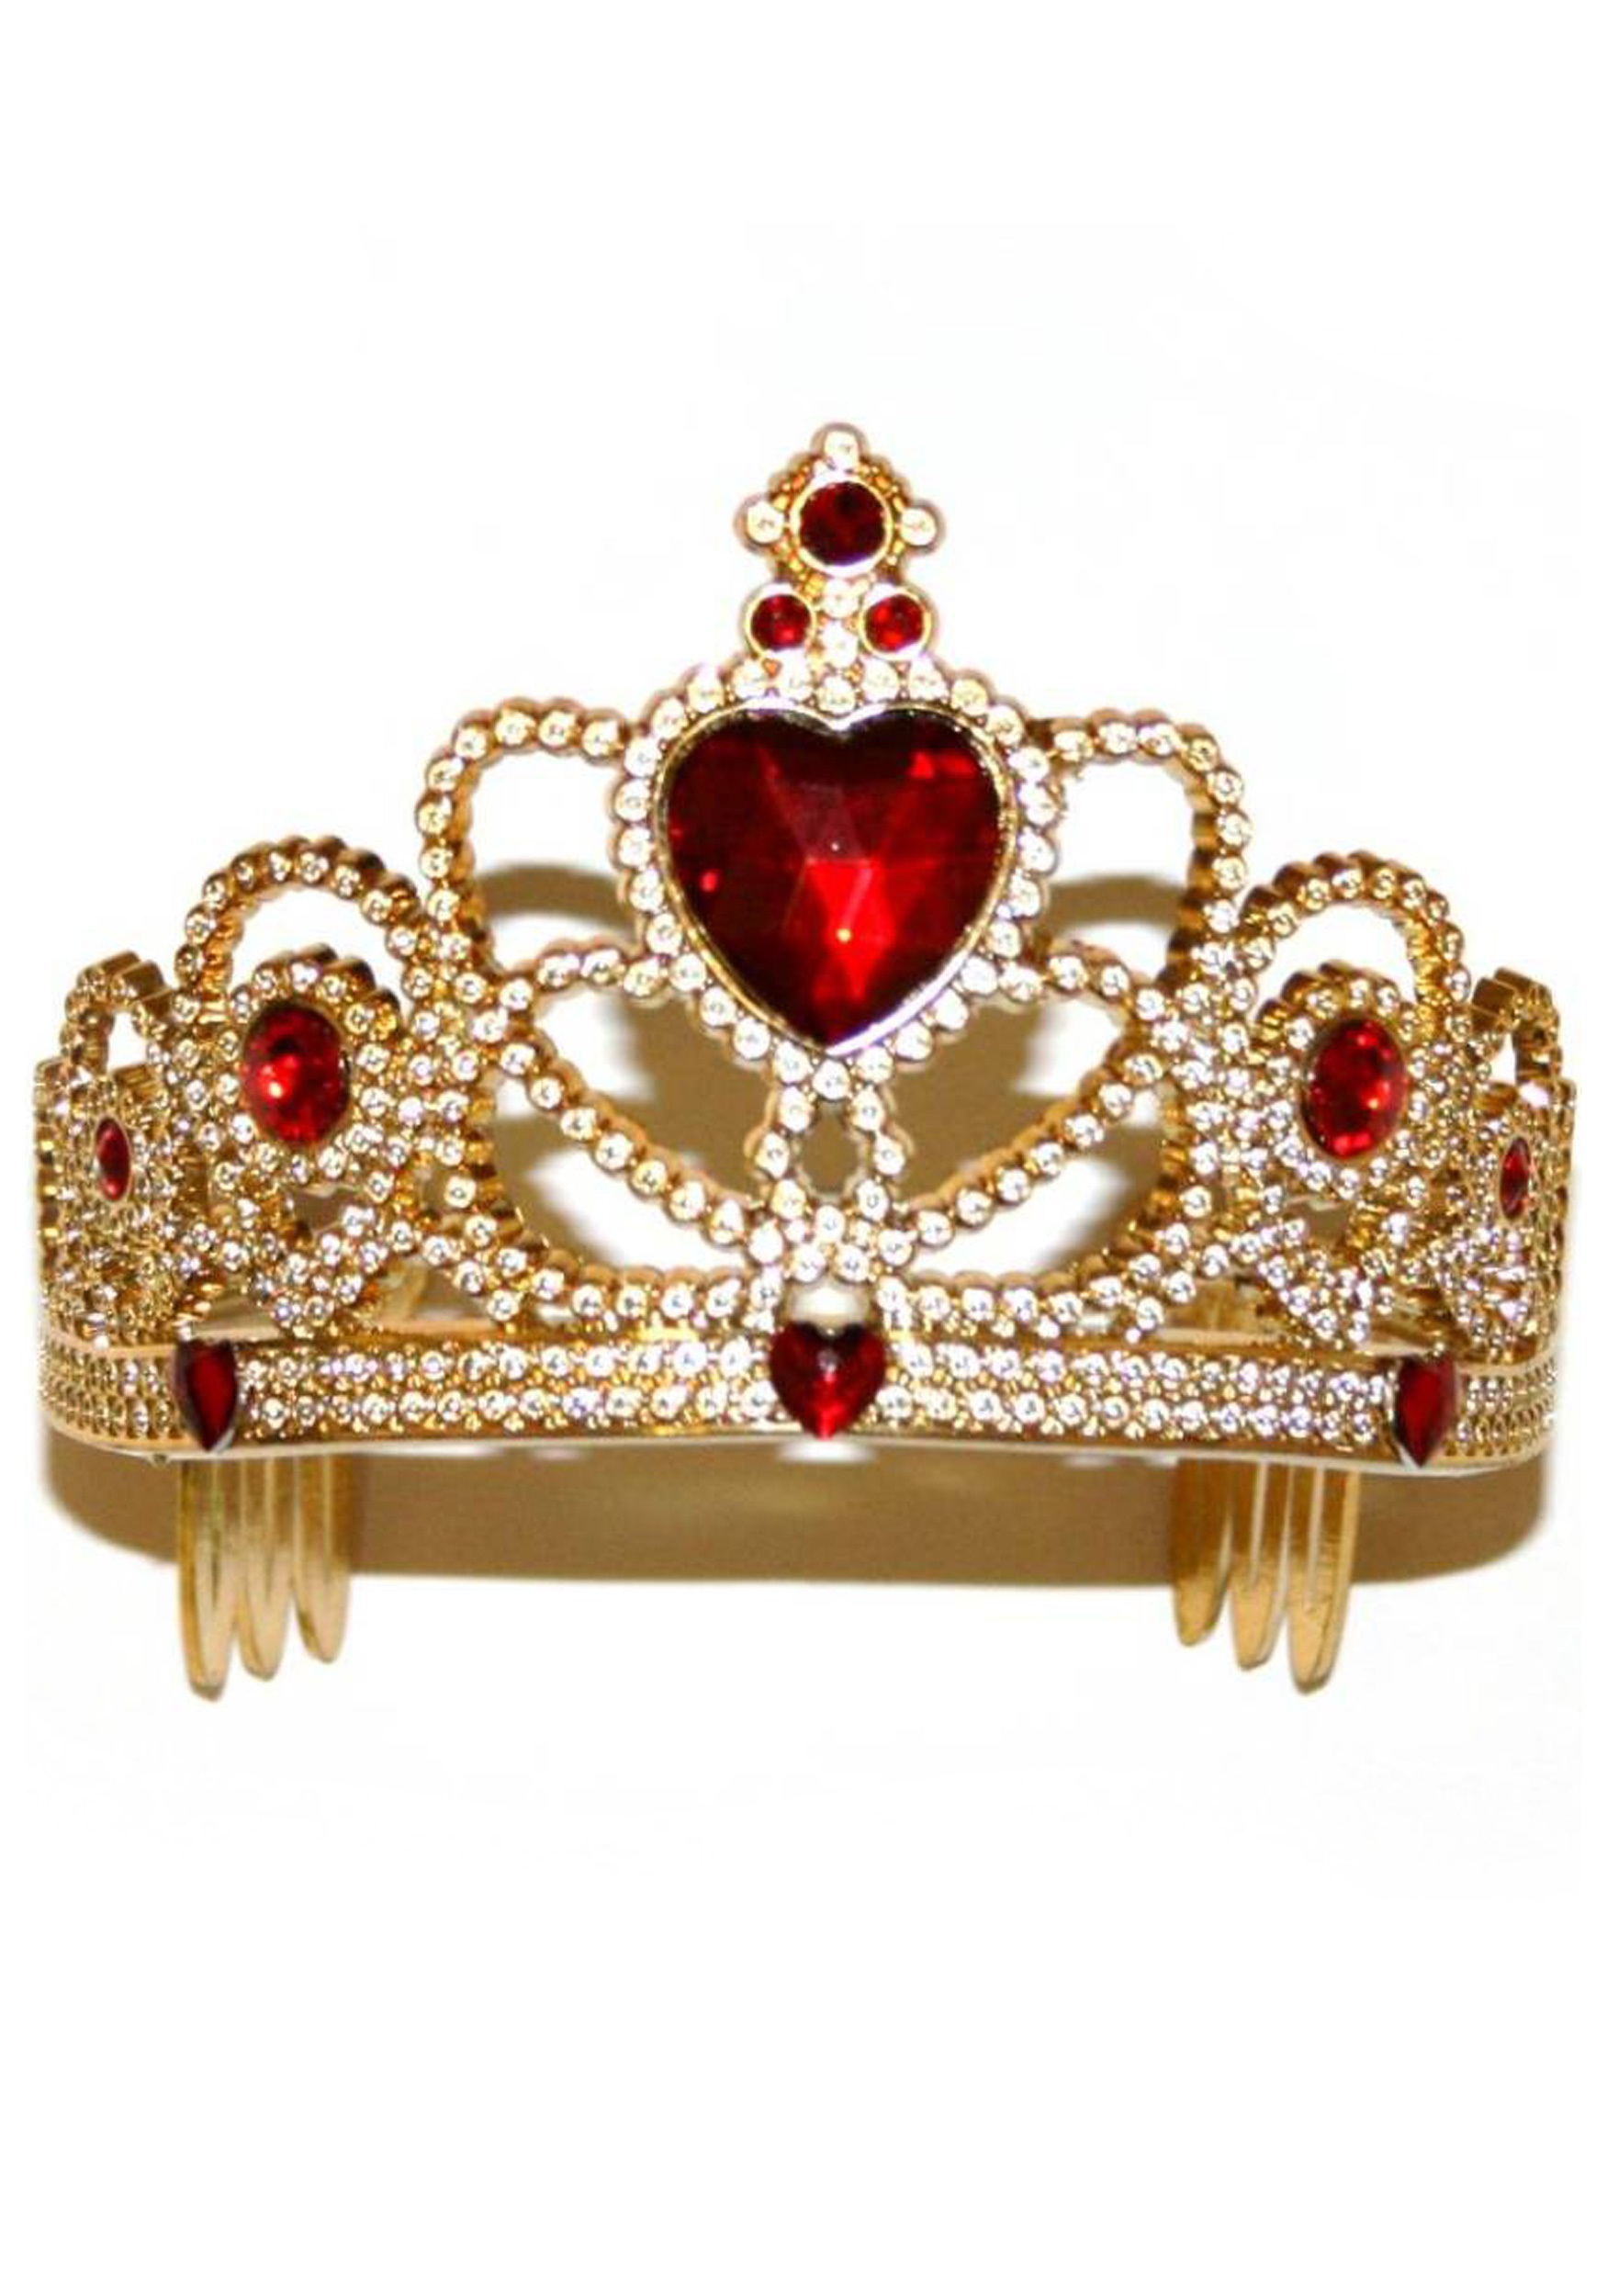 Gold And Red Princess Crown